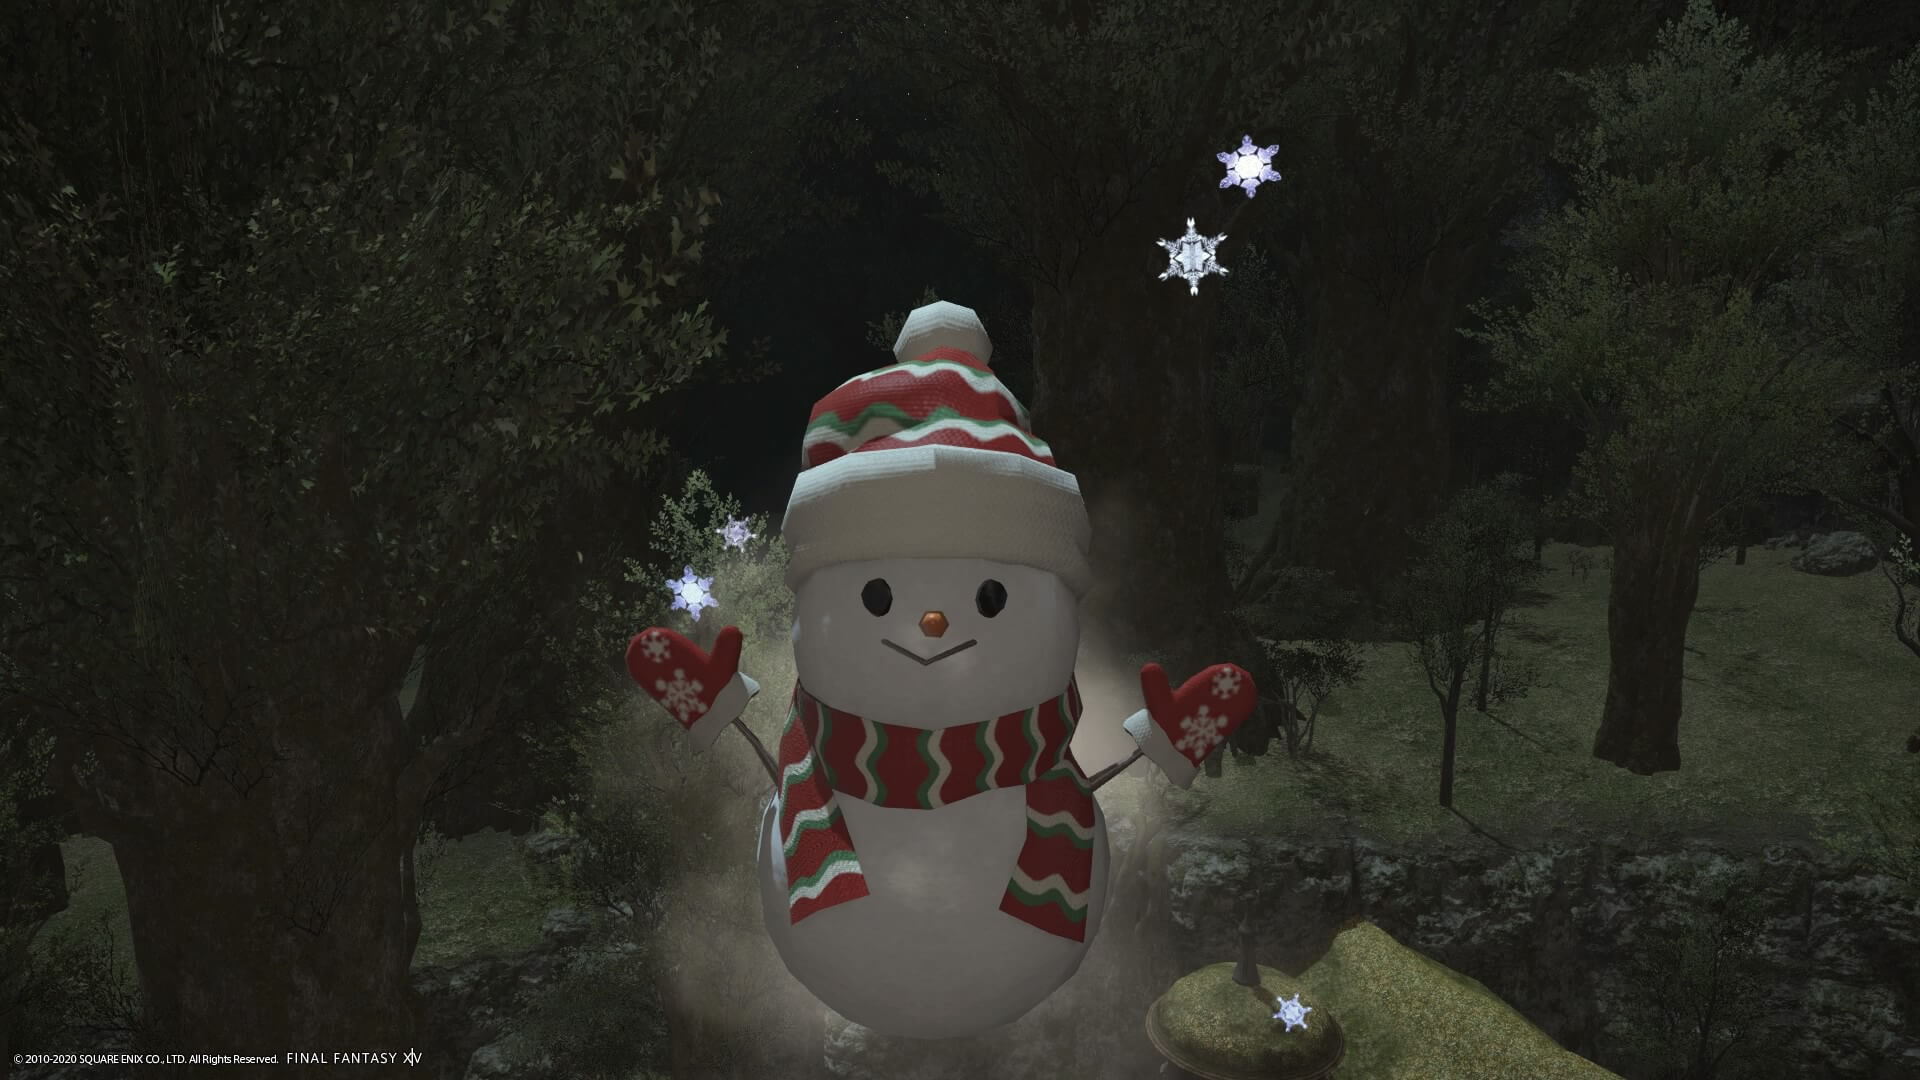 FFXIV: Shadowbringers Guide - How to Get the Snowman Mount